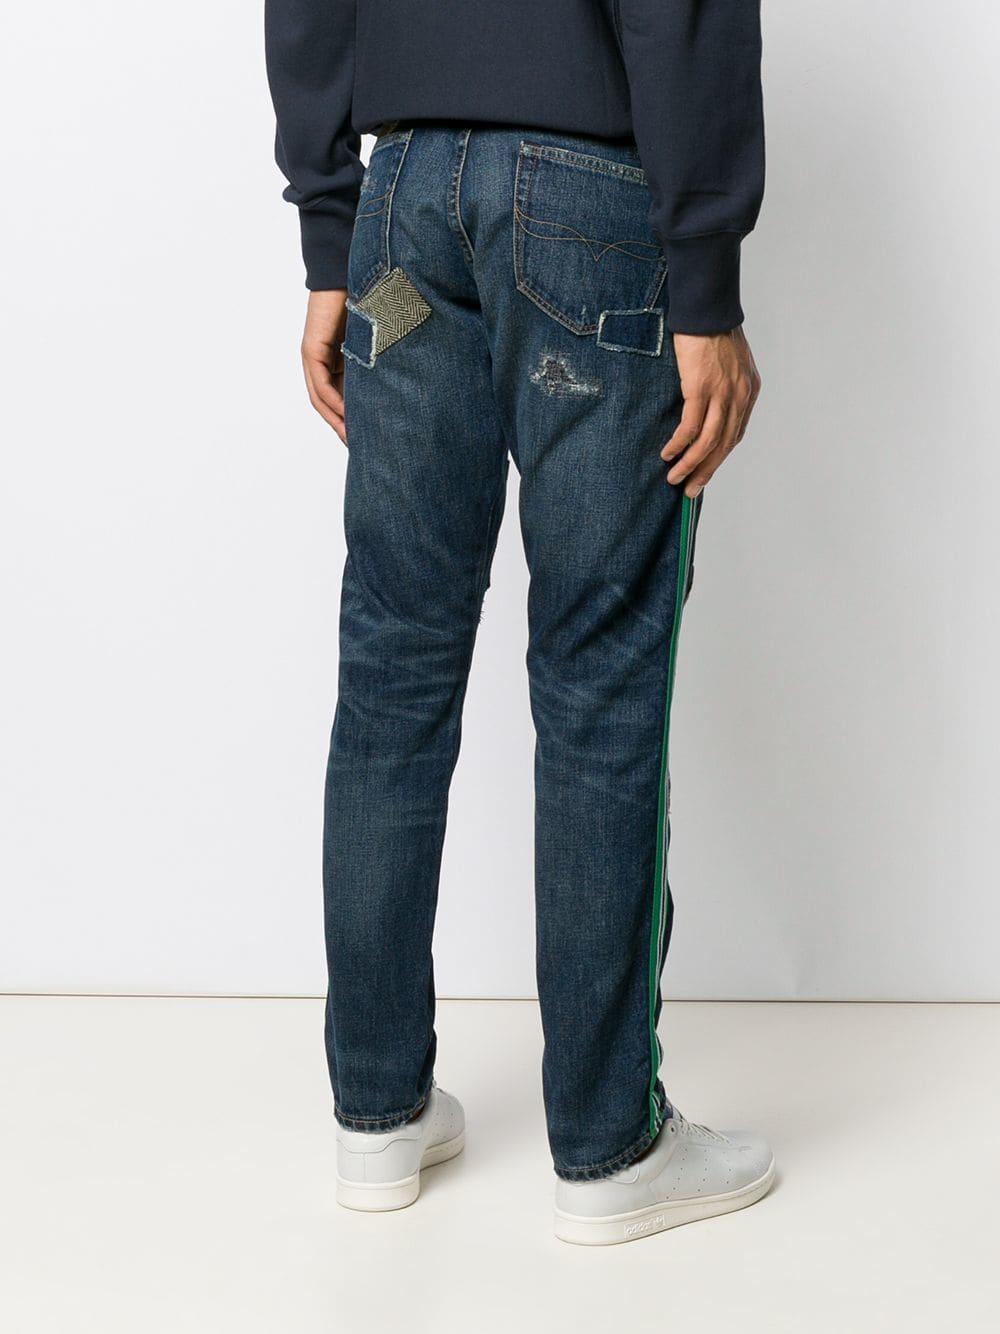 Polo Ralph Lauren Contrast Patch Jeans in Blue for Men - Lyst